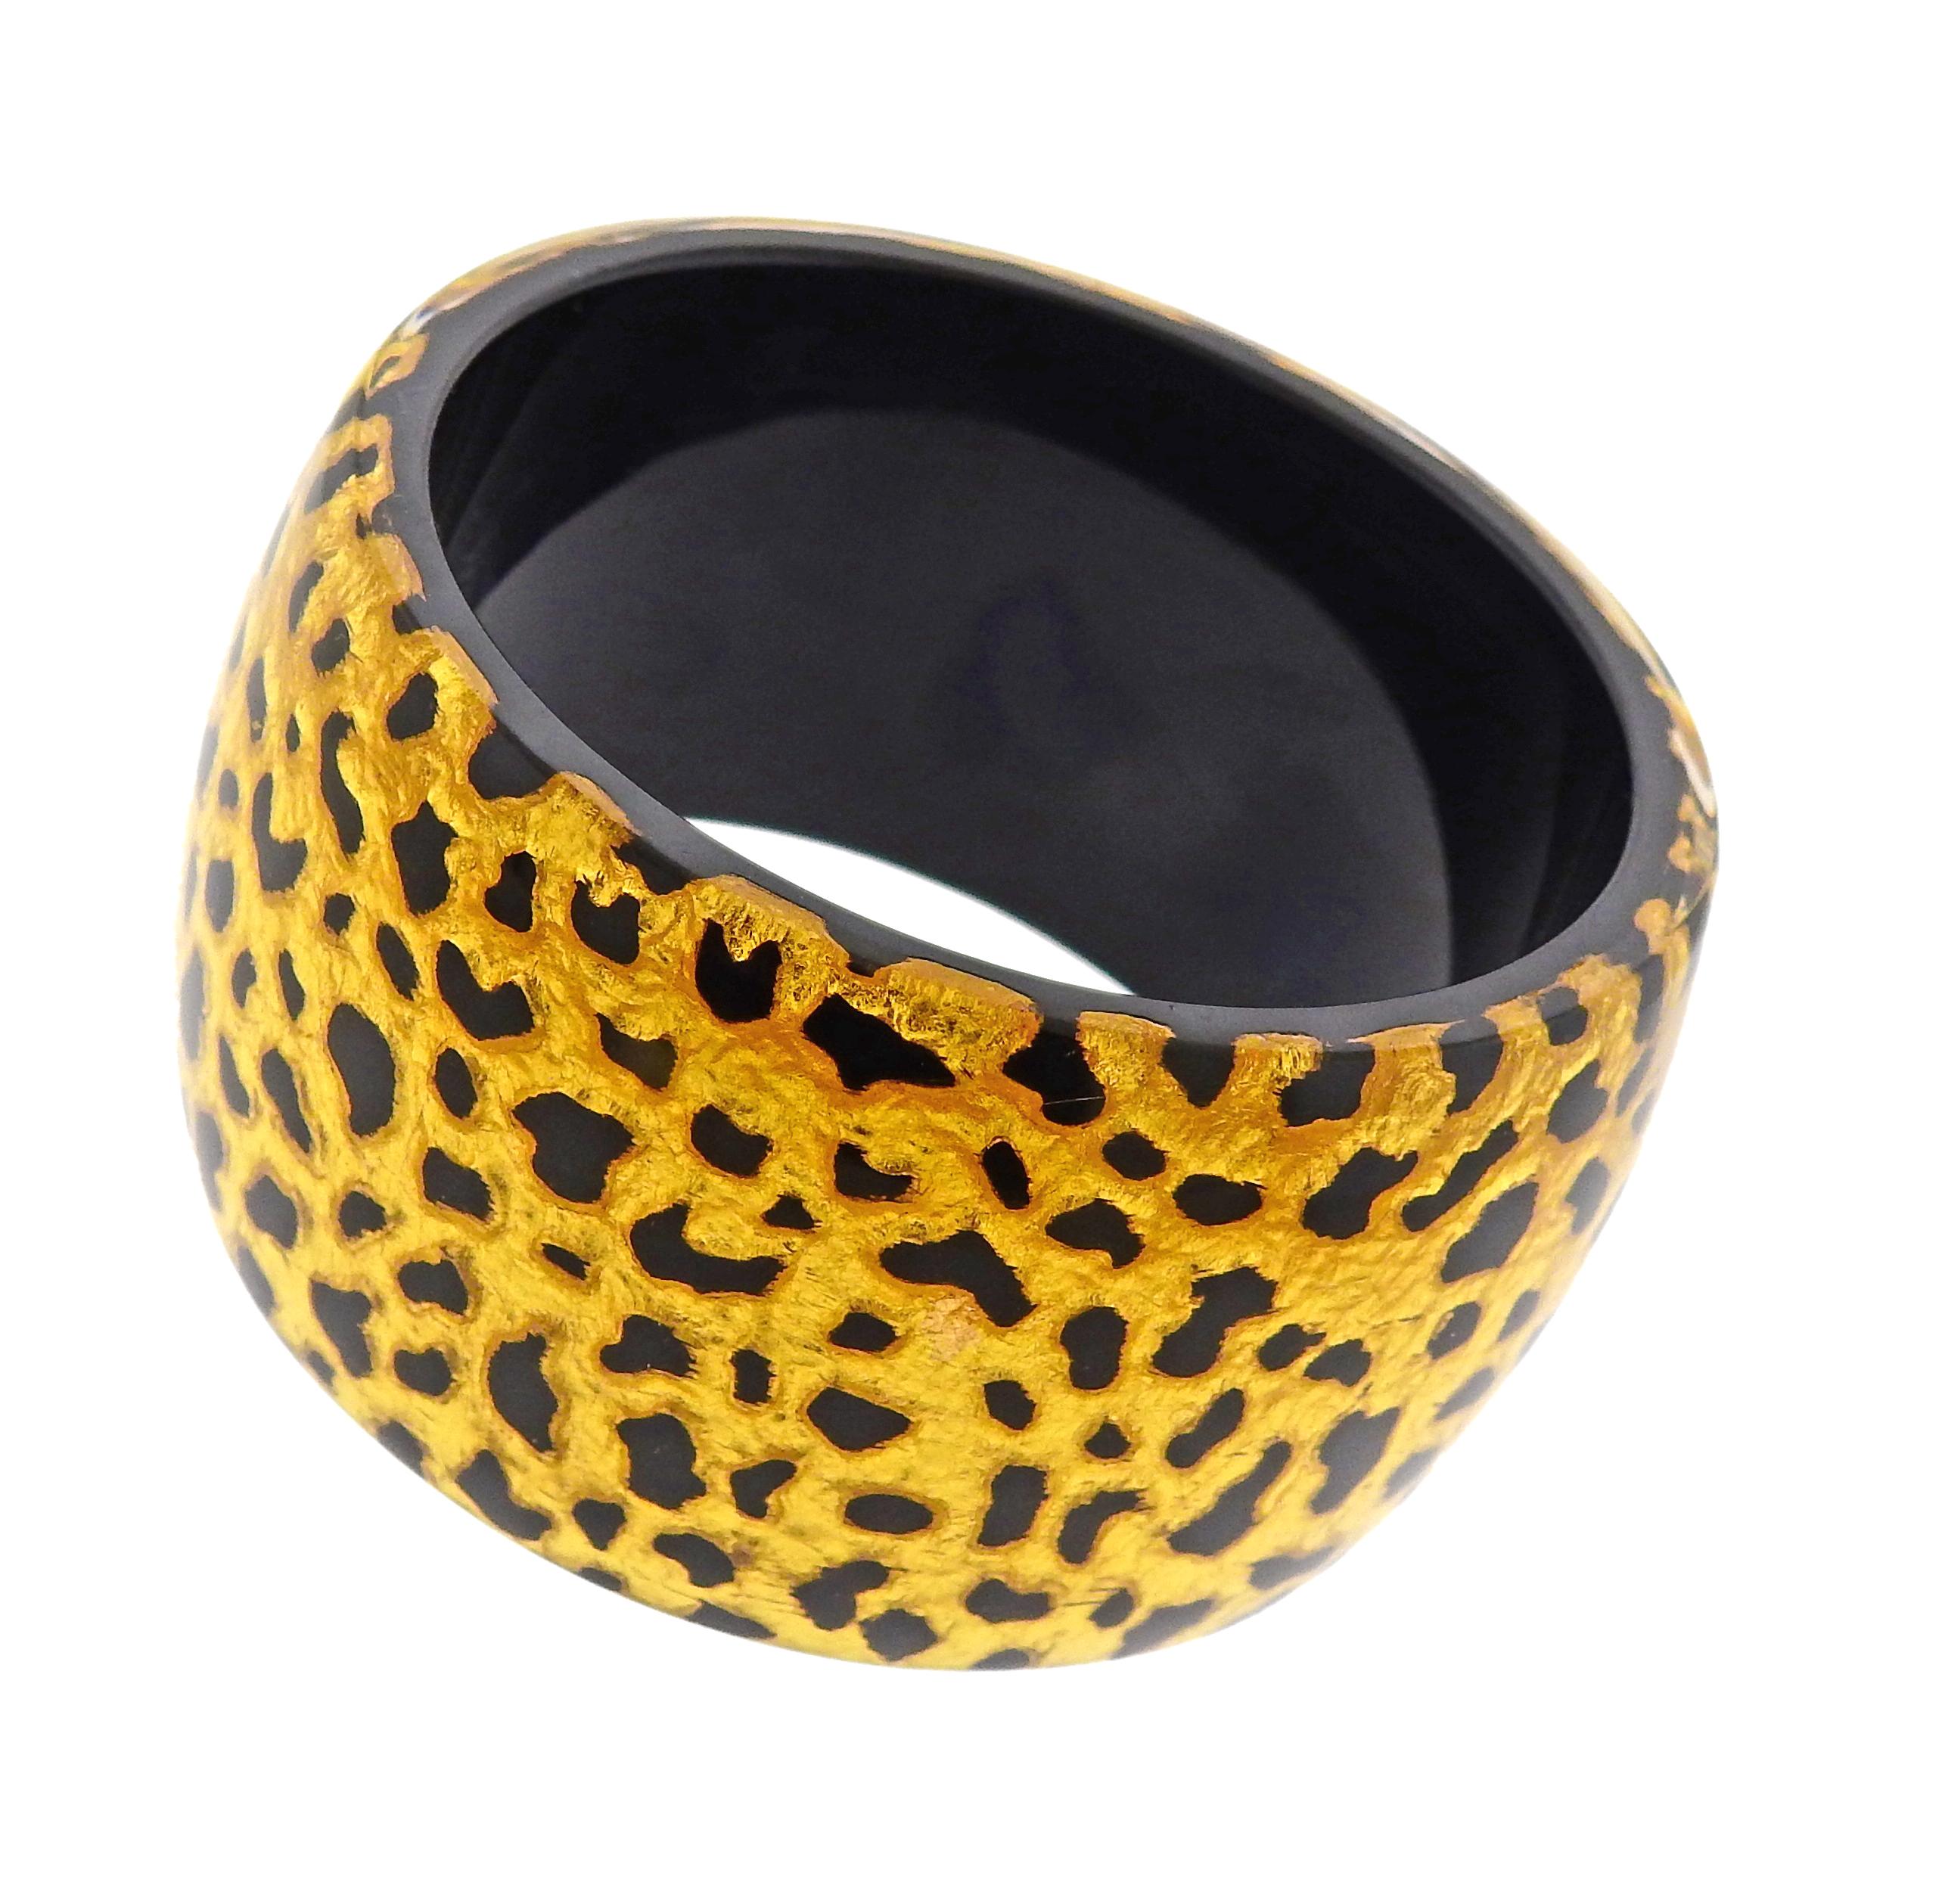 Wide bangle bracelet, set in bakelite with gold leaves. Bracelet will fit up to a 7